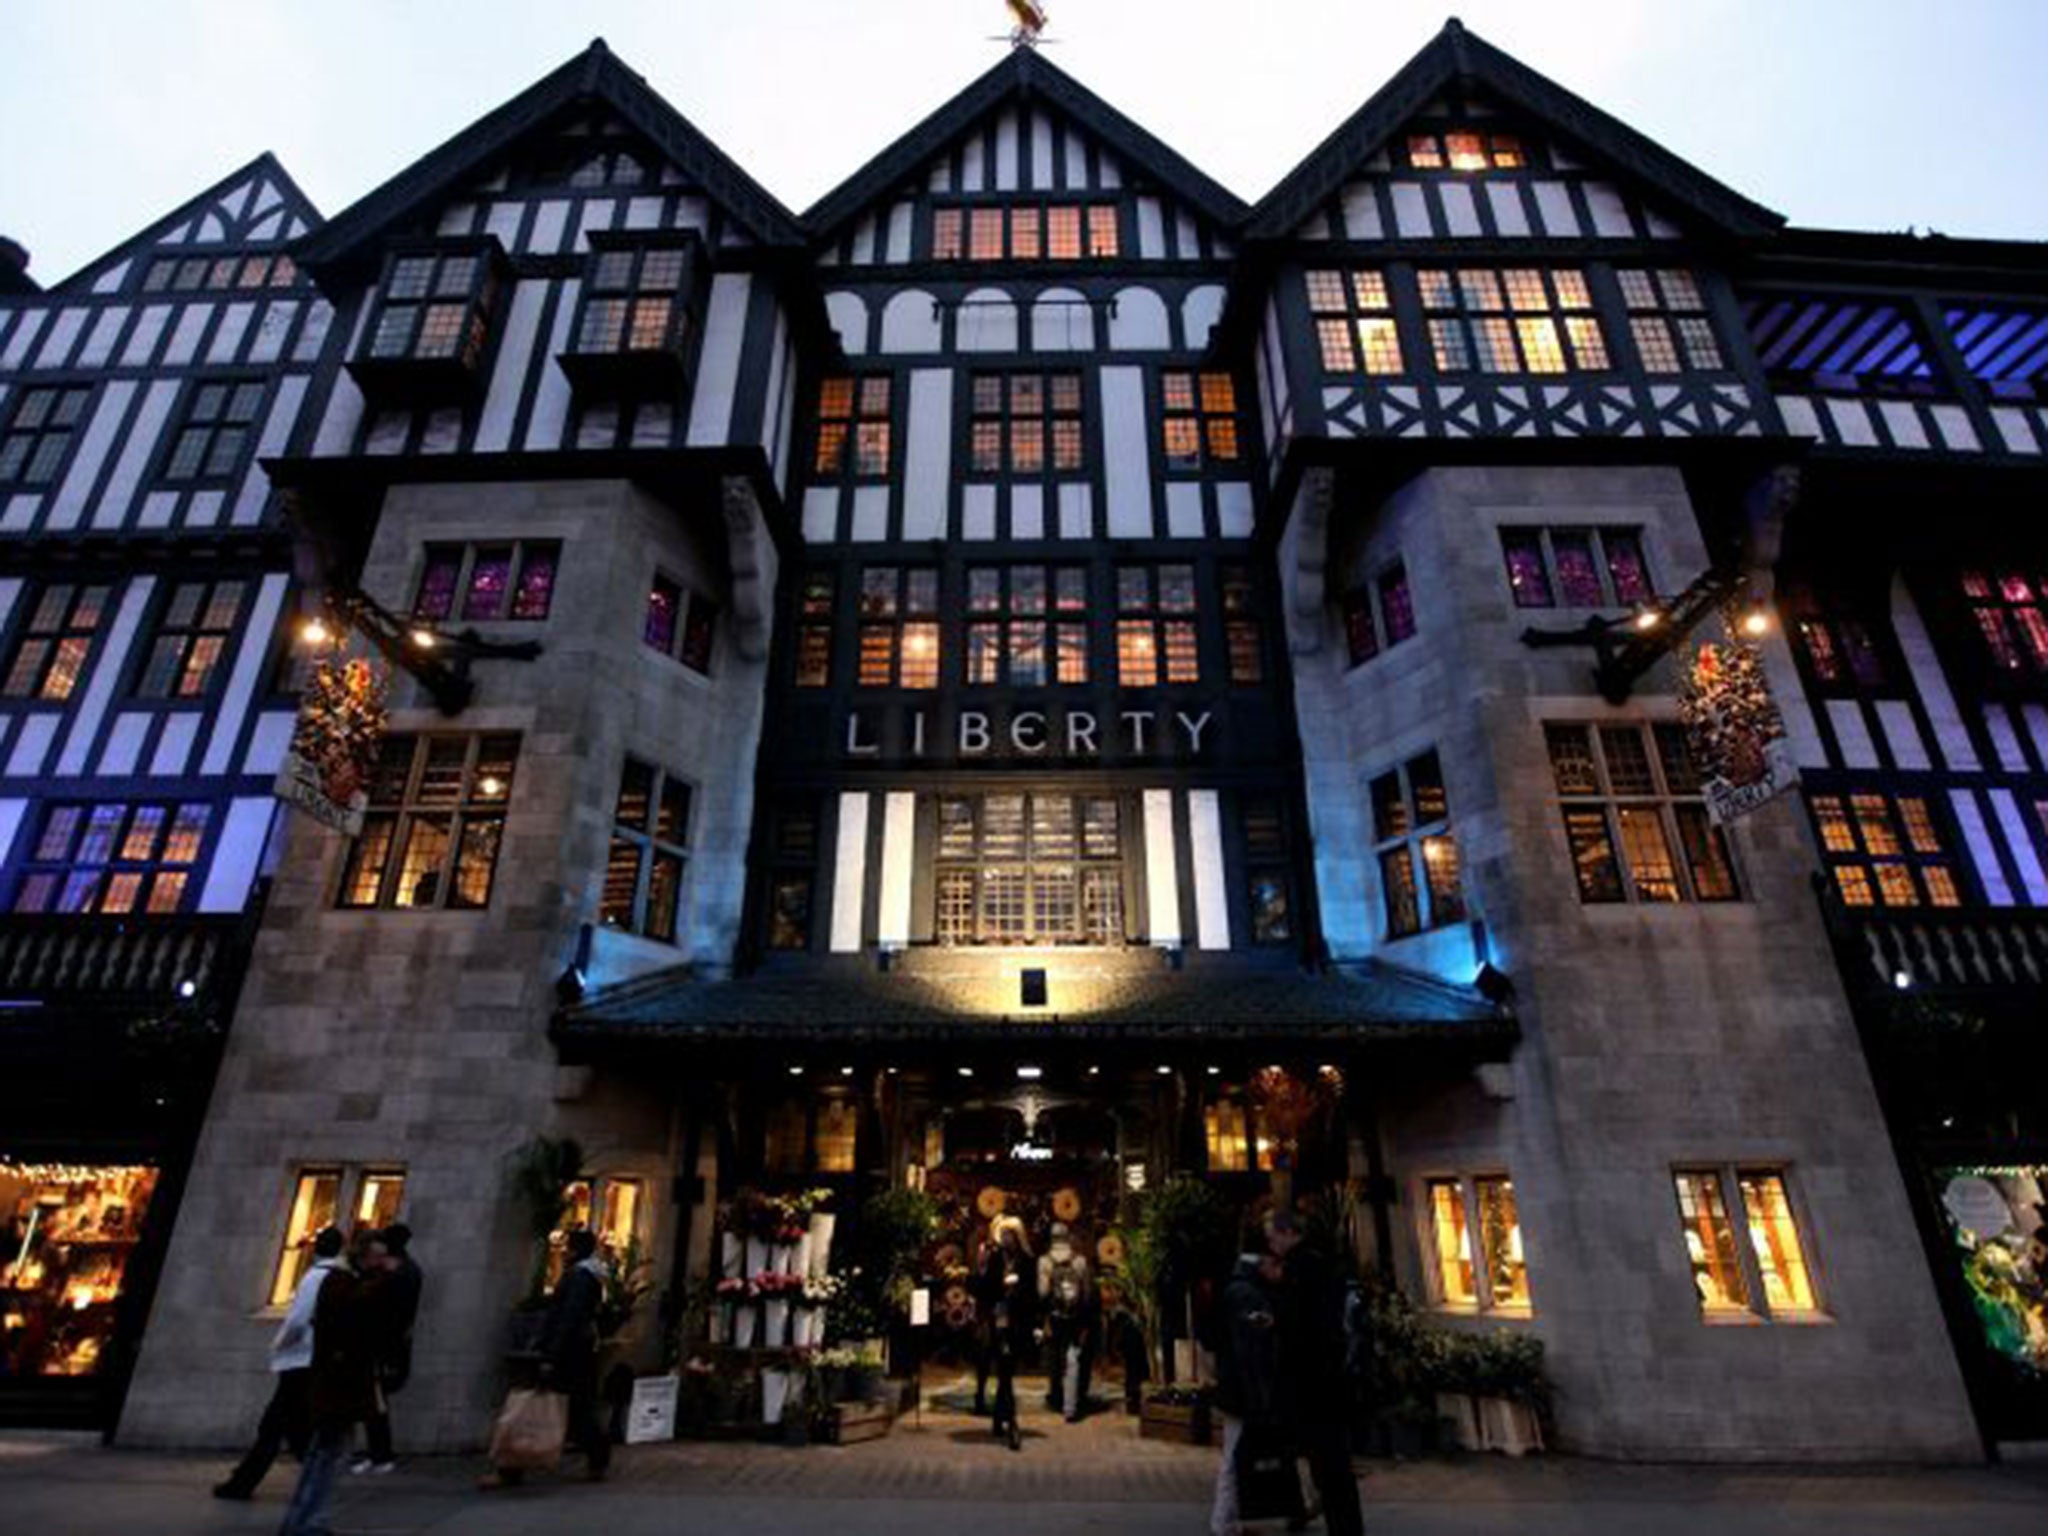 The Conles family spent £41.5m on acquiring the Liberty department store building in Great Marlborough Street in 2010